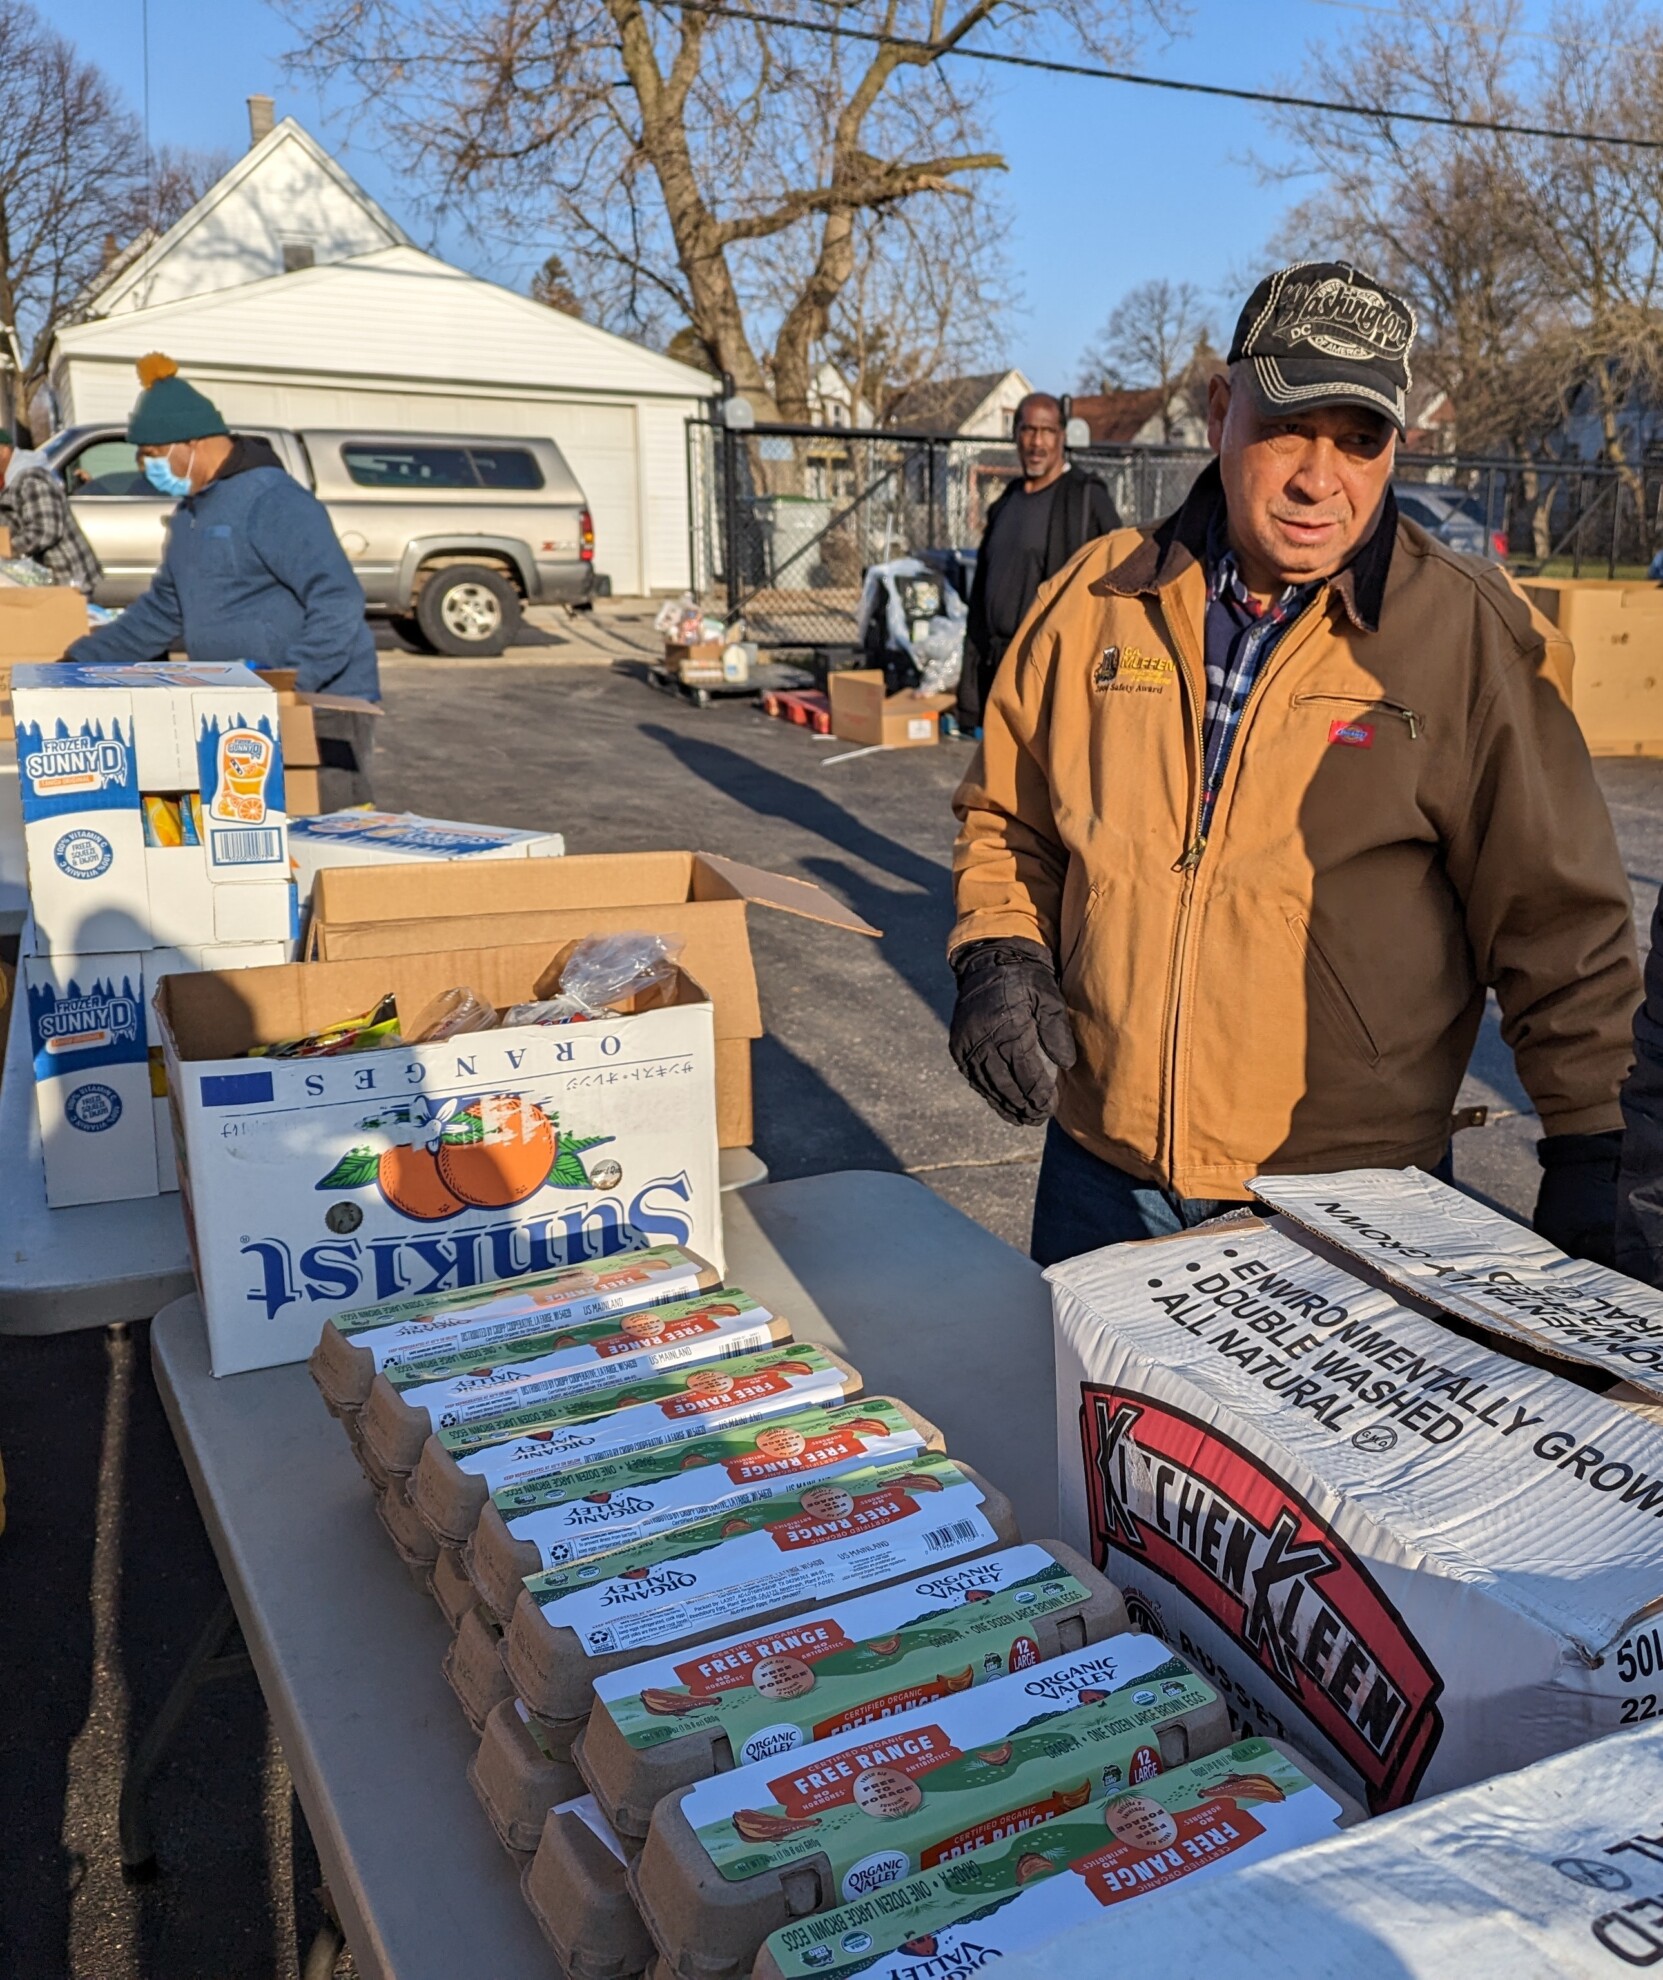 A volunteer wearing a brown jacket and a baseball cap stands by a table filled with eggs ready to distribute them to community members in need.